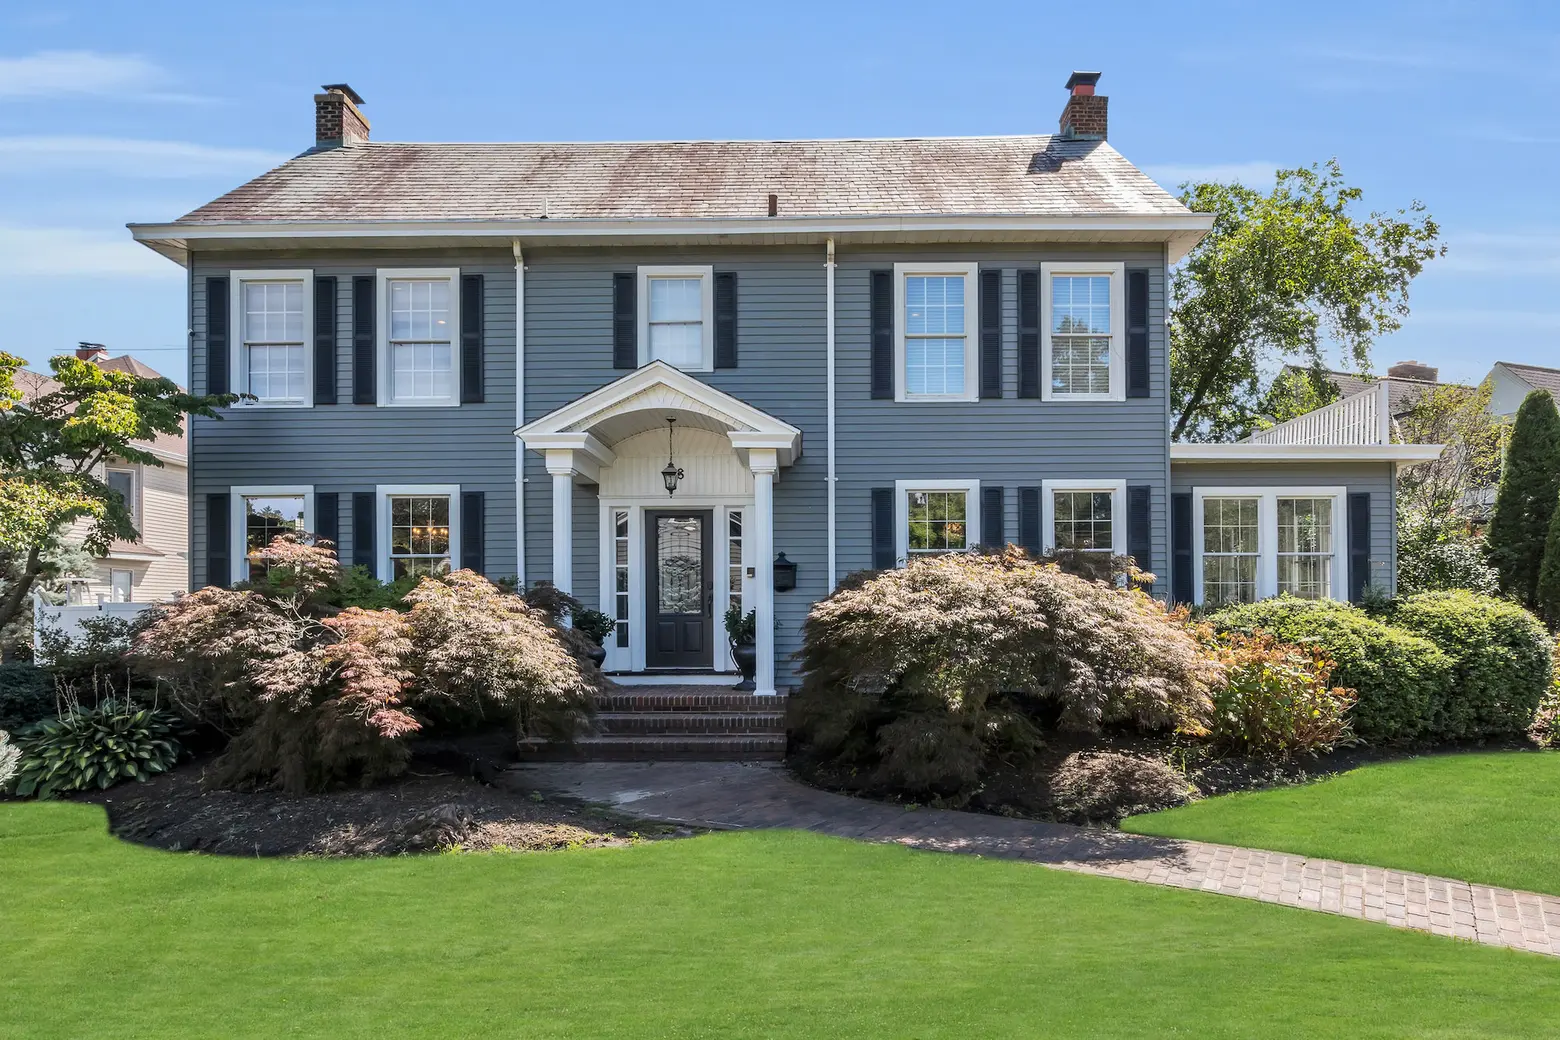 New Jersey home seen in ‘The Amityville Horror’ sells for $1.5M